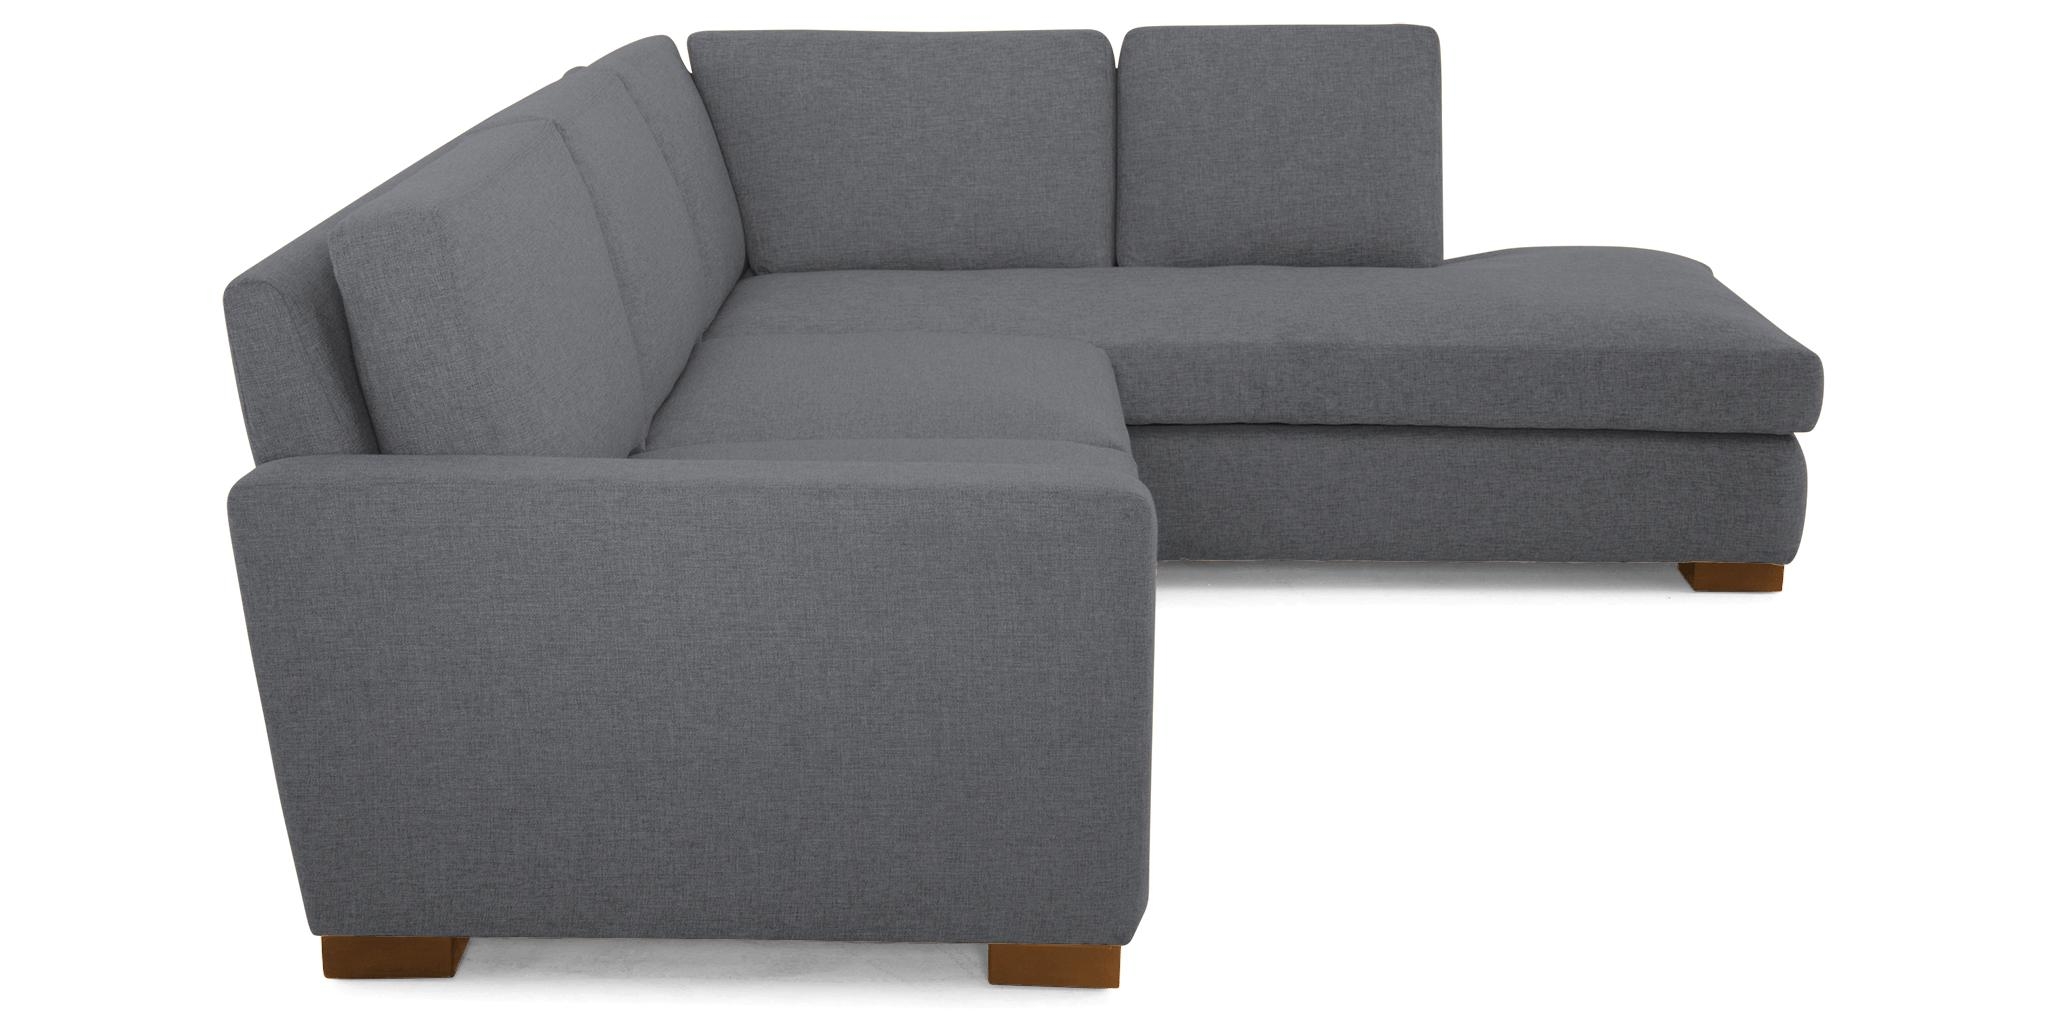 Gray Anton Mid Century Modern Sectional with Bumper - Essence Ash - Mocha - Right  - Image 2